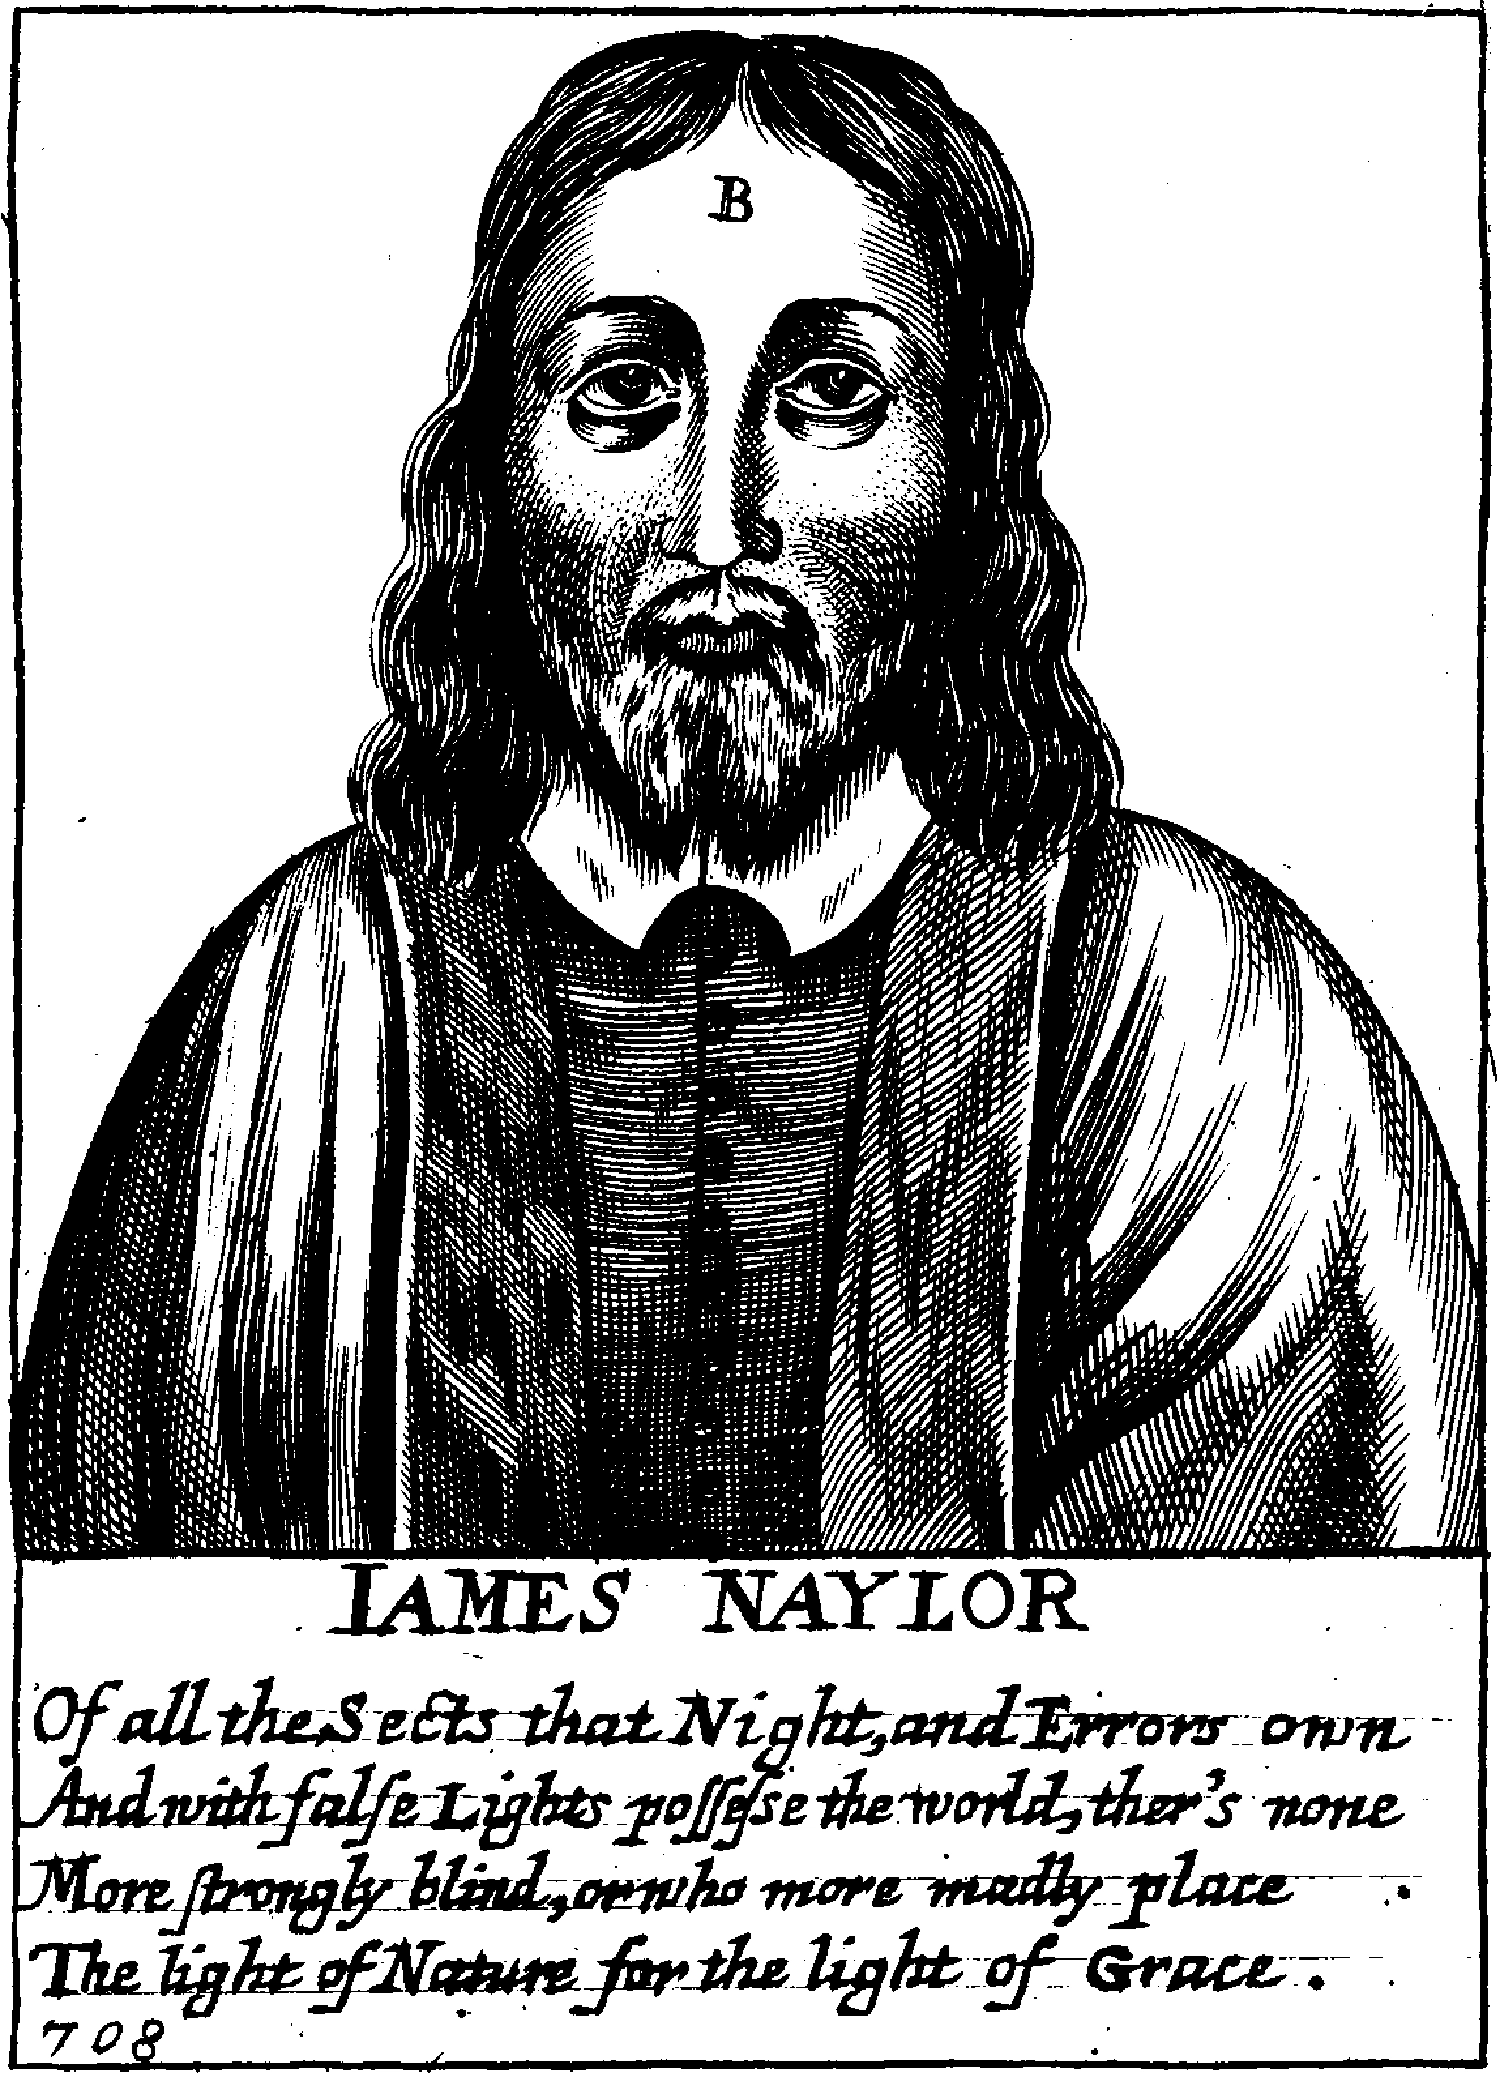 An engraved portrait of James Naylor including the “B” branded onto his forehead.